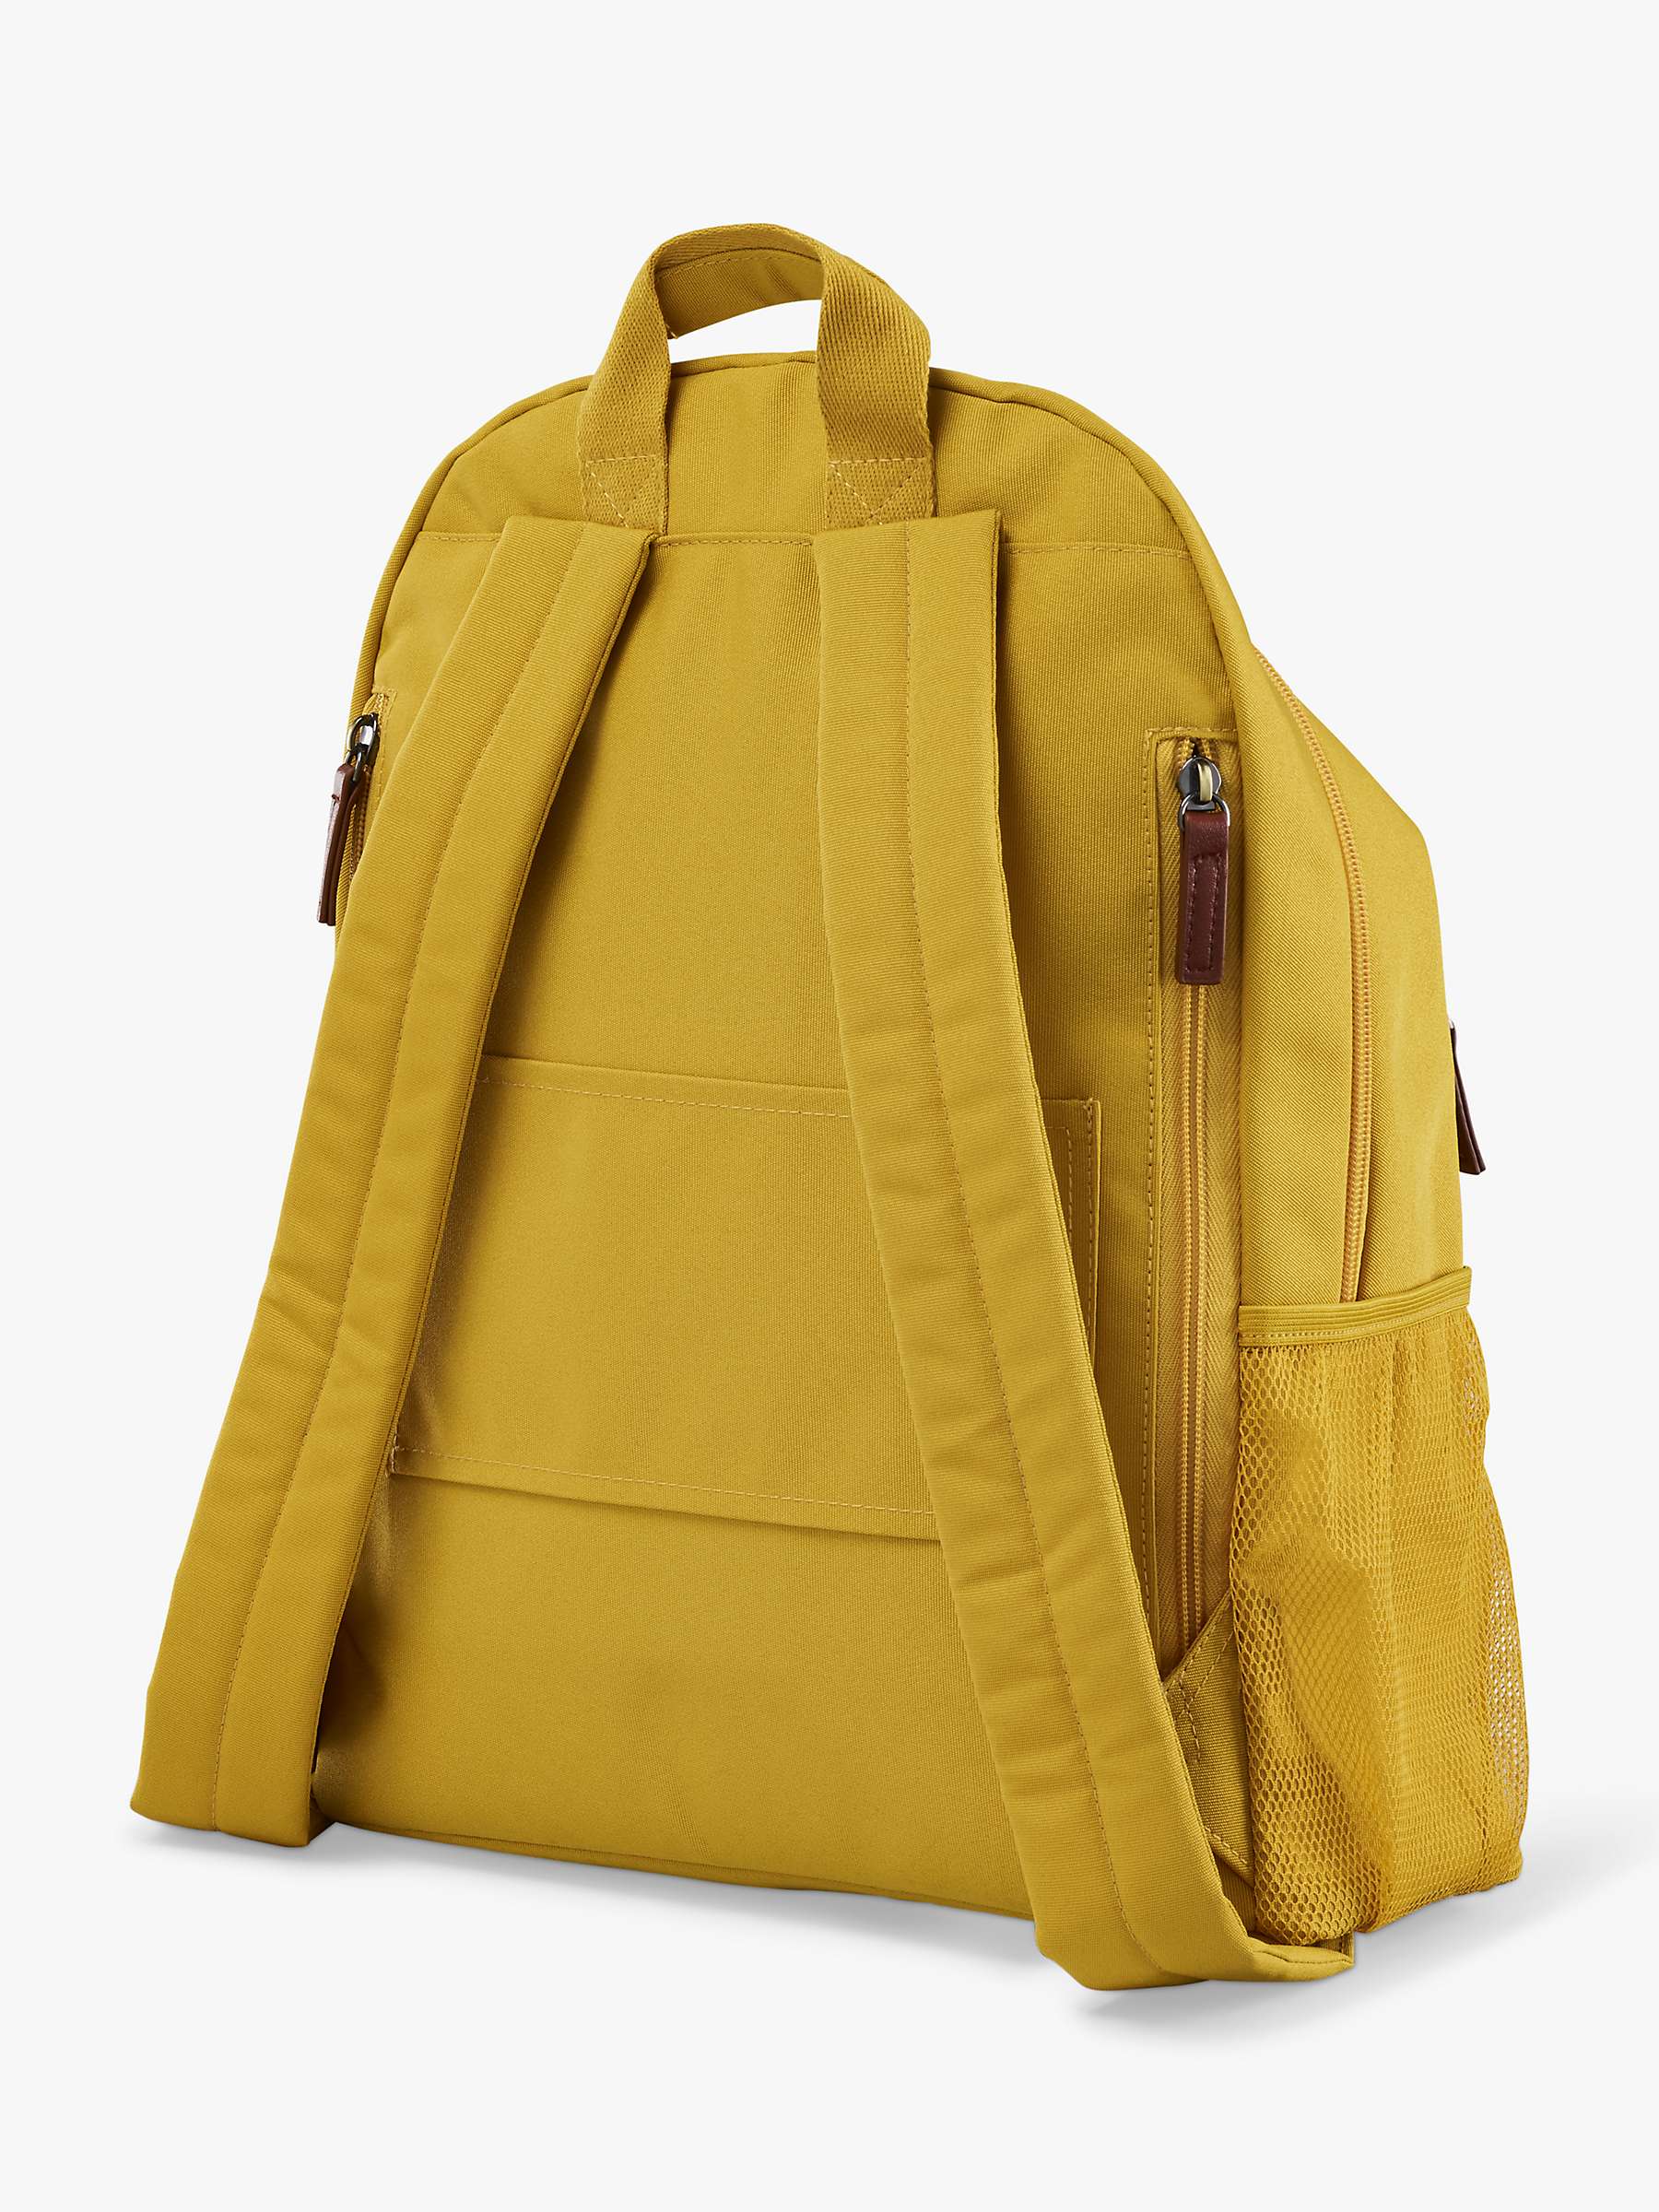 Buy Joules Coast Collection Large Backpack Online at johnlewis.com